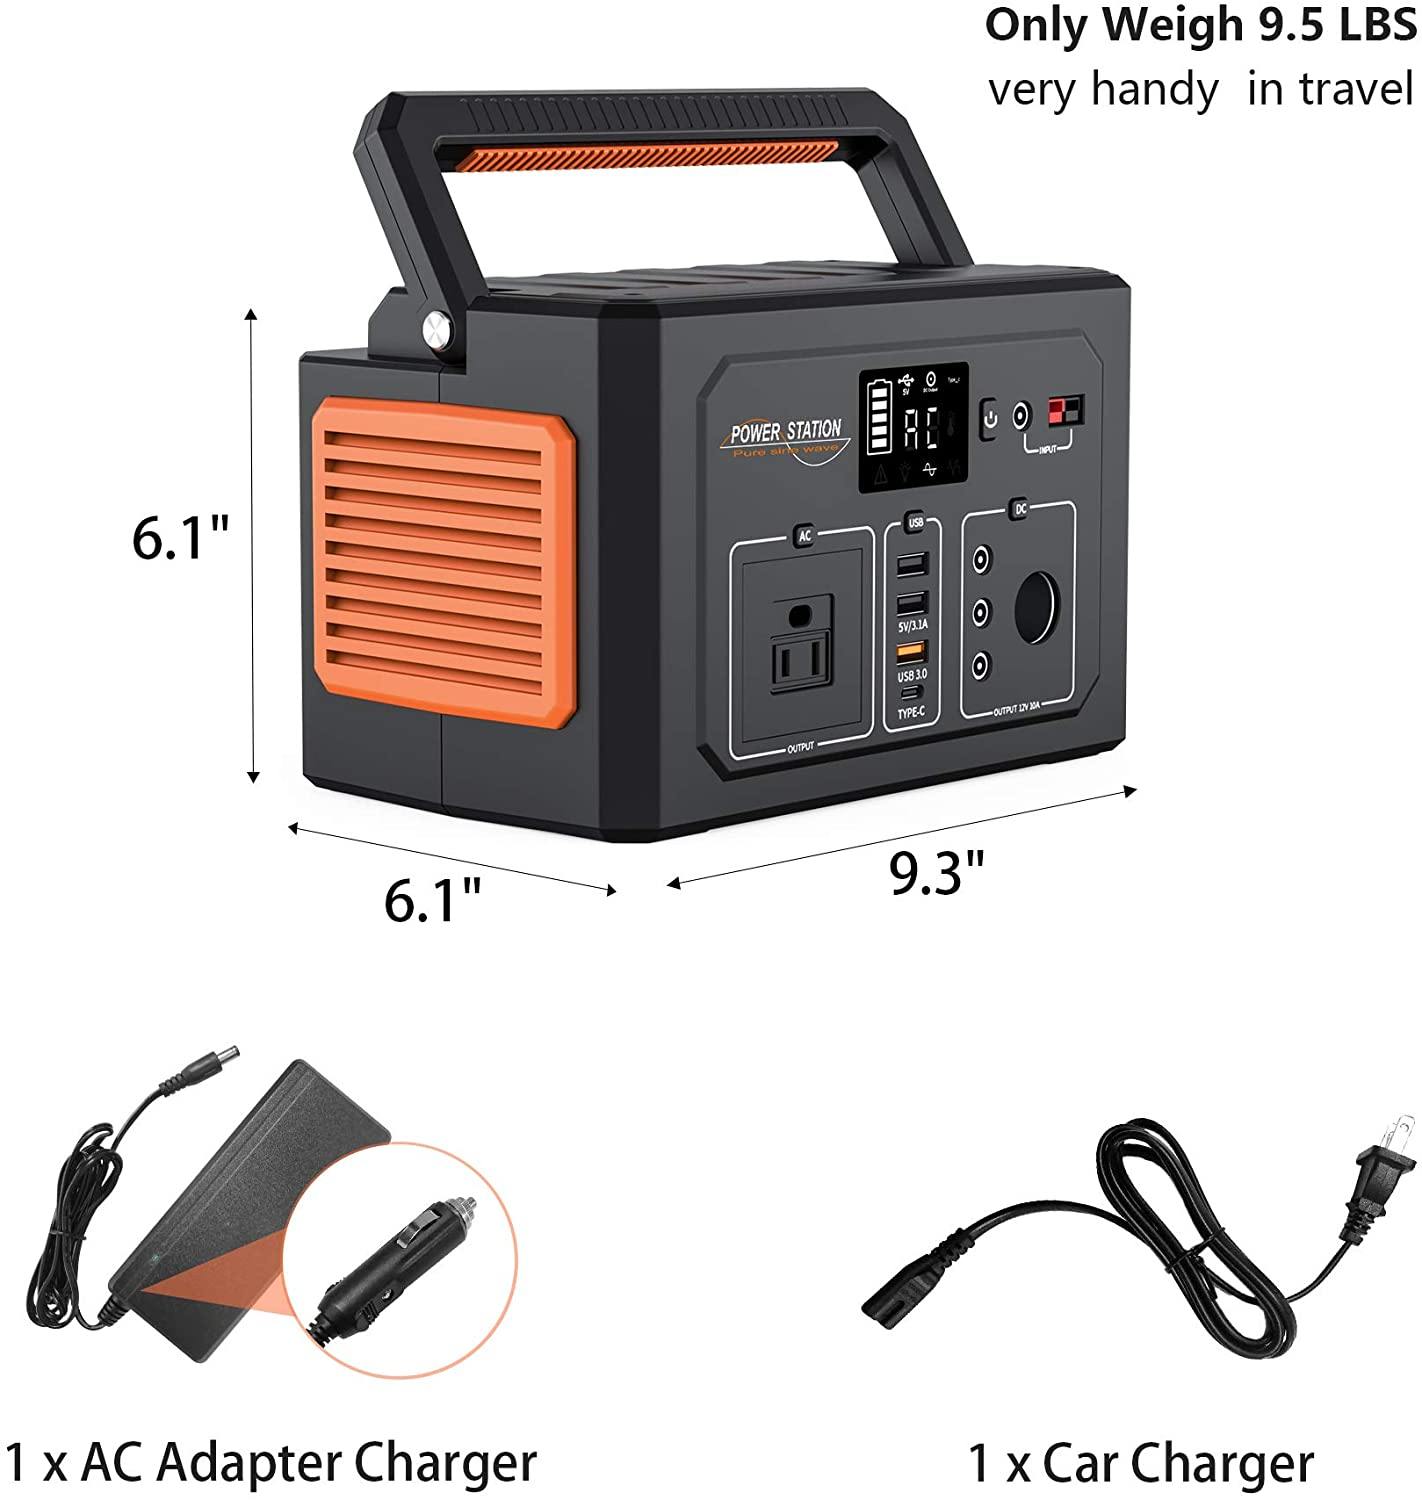 Portable Power Station 400Wh, Multipurpose Portable Power Supply For Home, Travel And Camping With Type-C - Bosonshop